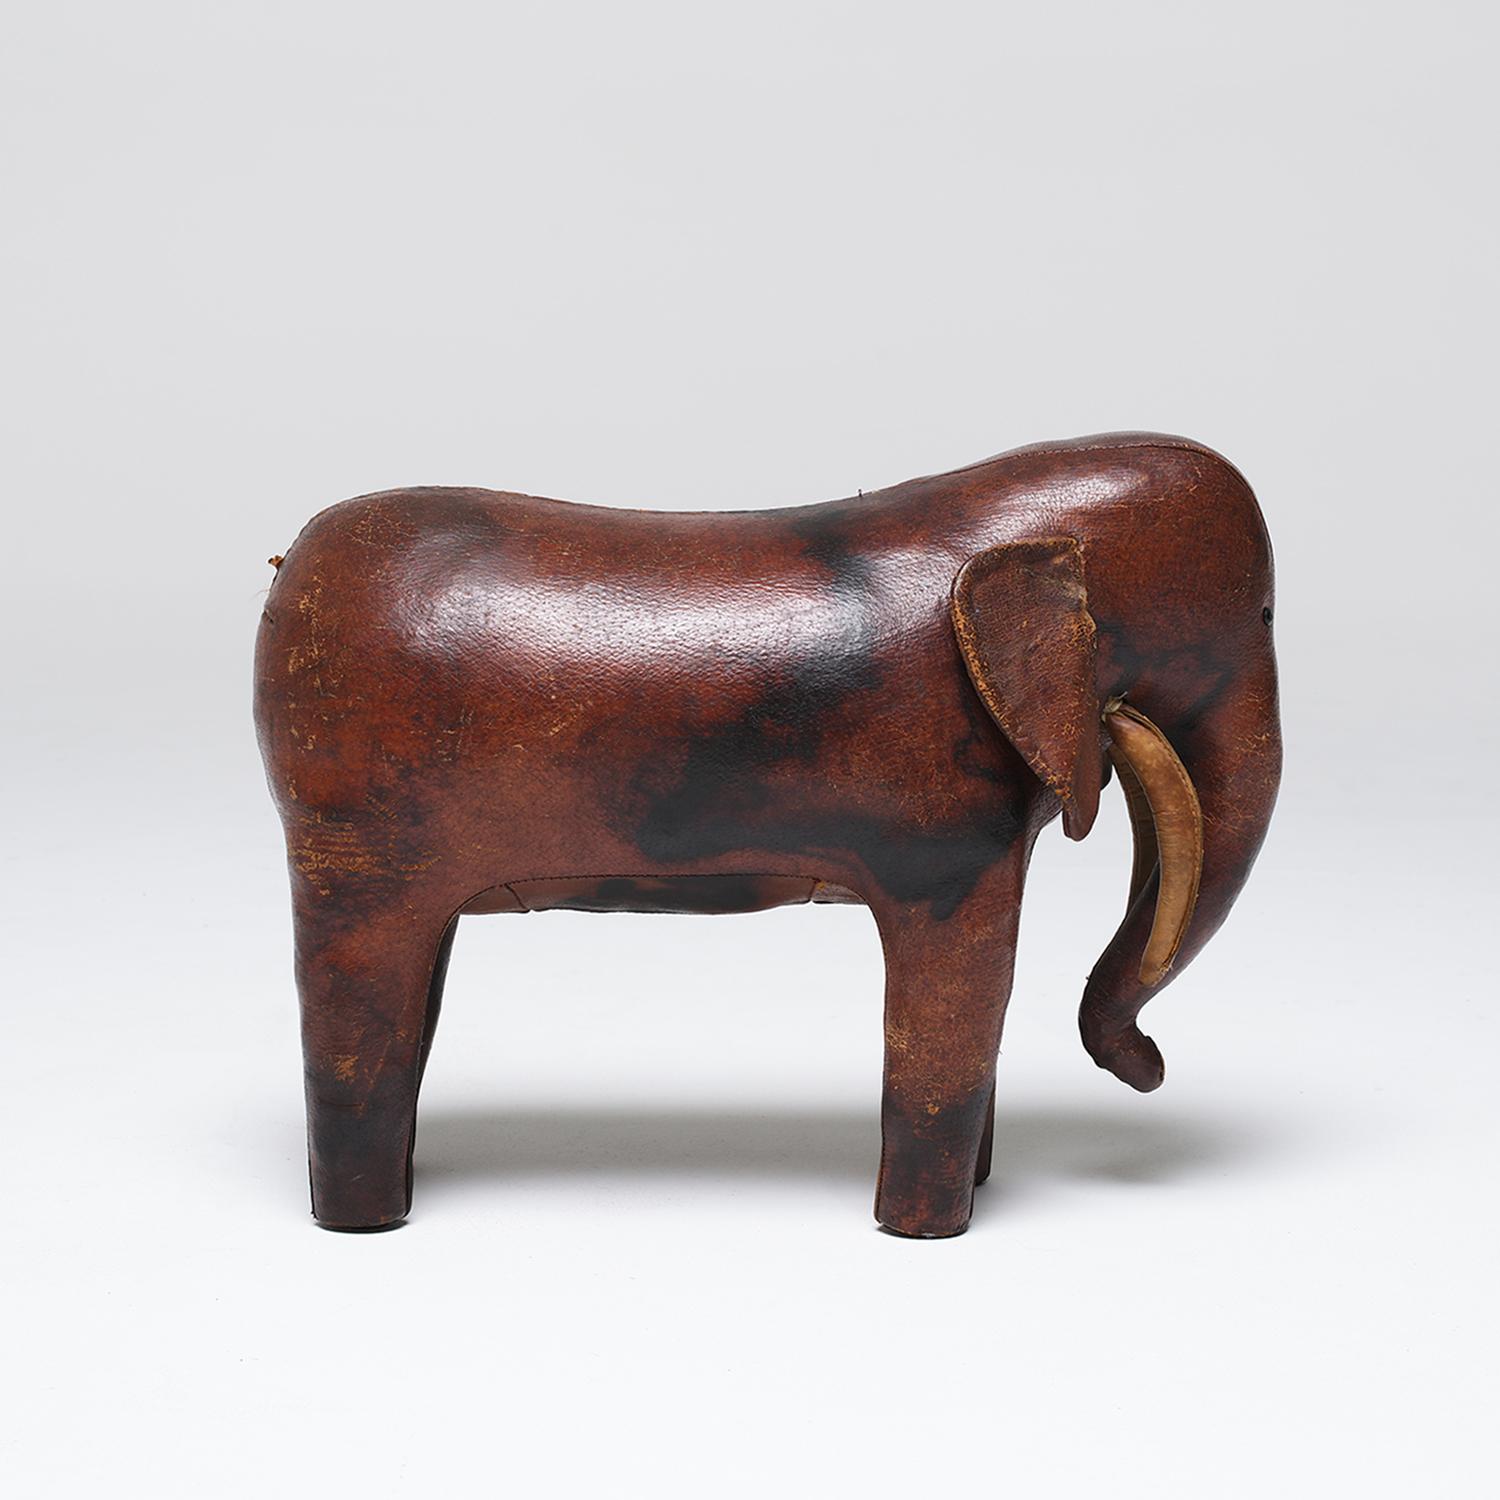 20th Century English Vintage Elephant Footstool by Dimitri Omersa For Sale 6